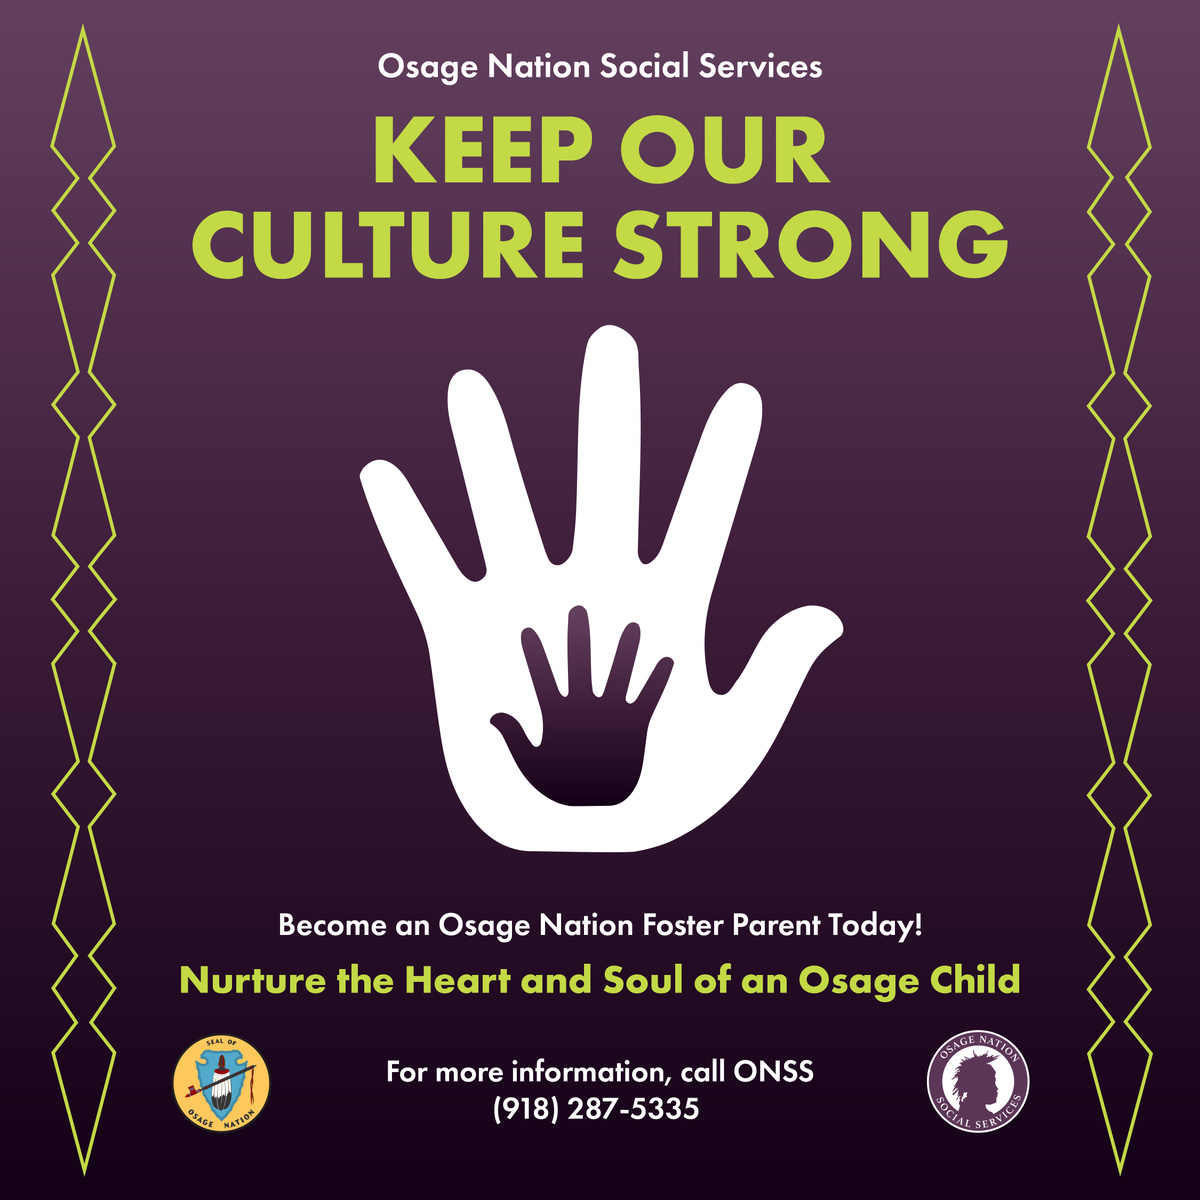 We currently have 102 Osage children in foster care across the US. Keeping these children close to their culture and opportunities strengthens both the child and the Nation. Families interested in becoming a foster home should contact Osage Nation Social Services at 918-287-5335.